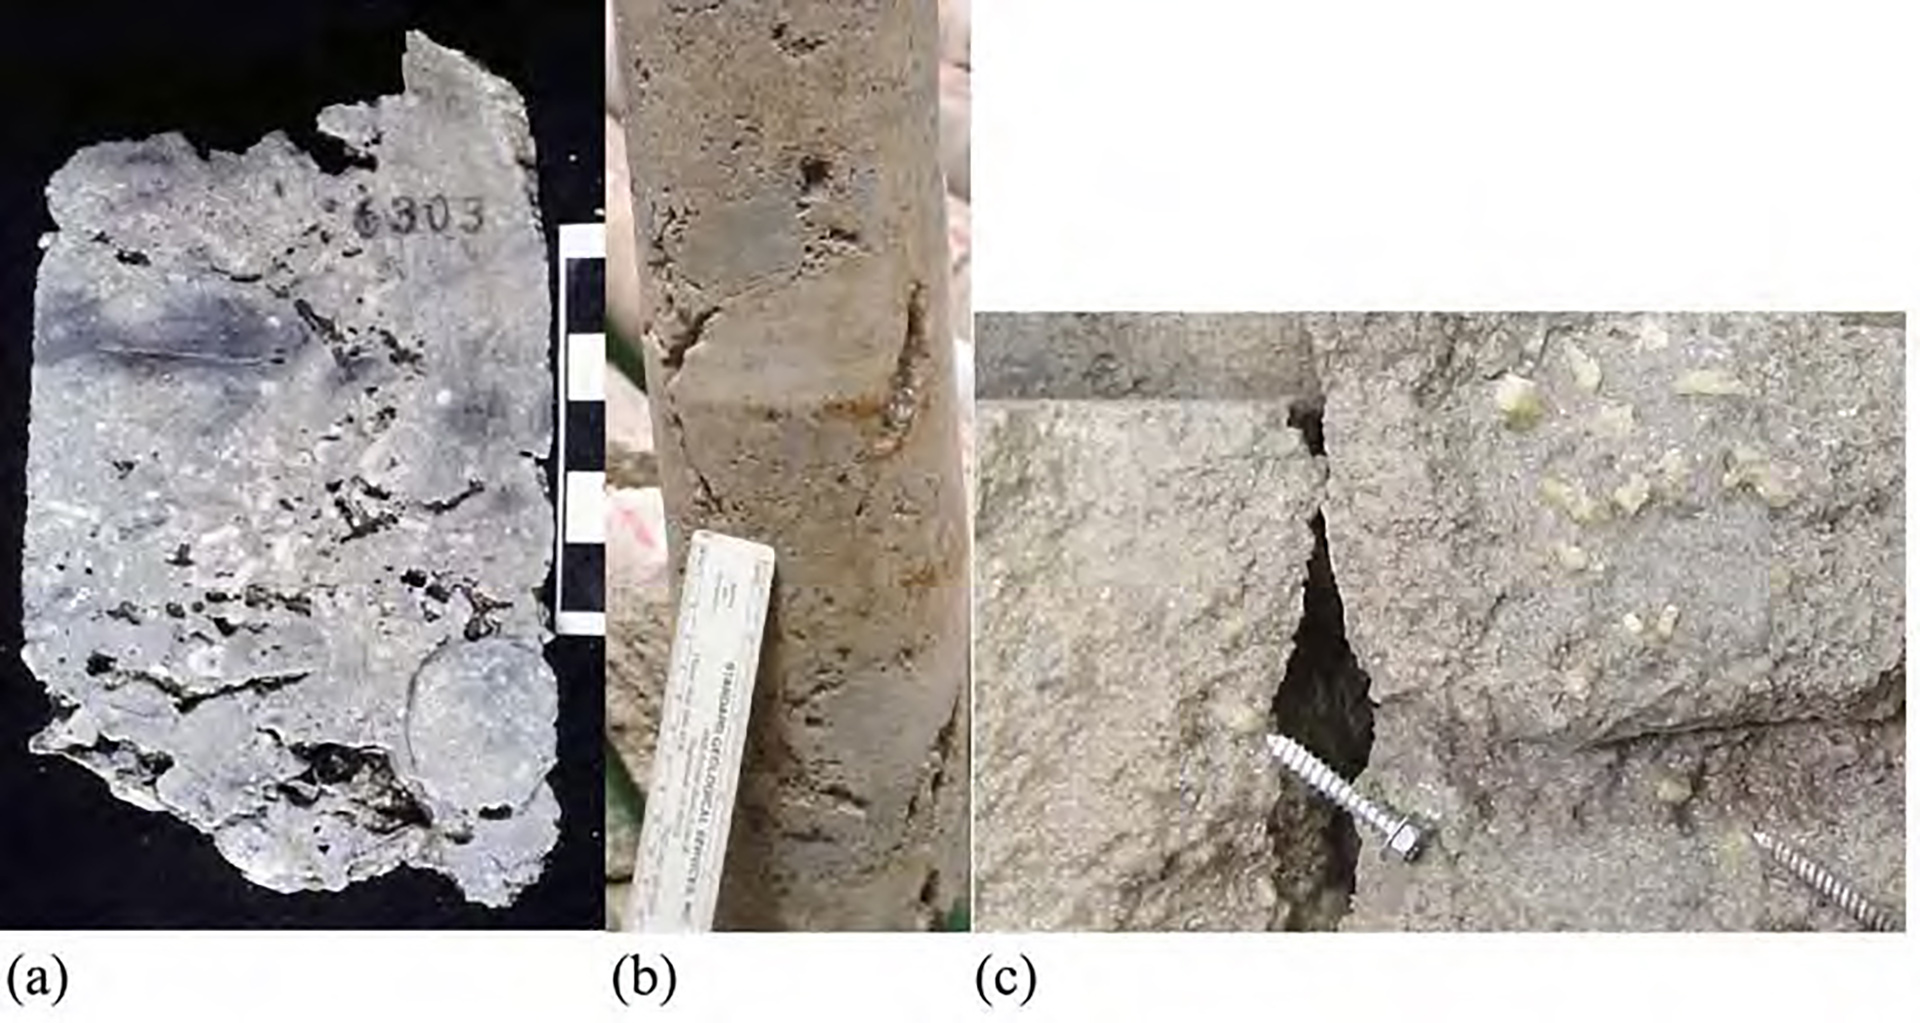 The evidence of meteoric diagenesis processes in SACROC Unit cores: (a) vuggy porosity from well 17-5 (Raines, 2003), (b) vuggy porosity from well 37-11, and (c) calcite crystal growth indicates that fractures are open and reservoir fluid passed through it.